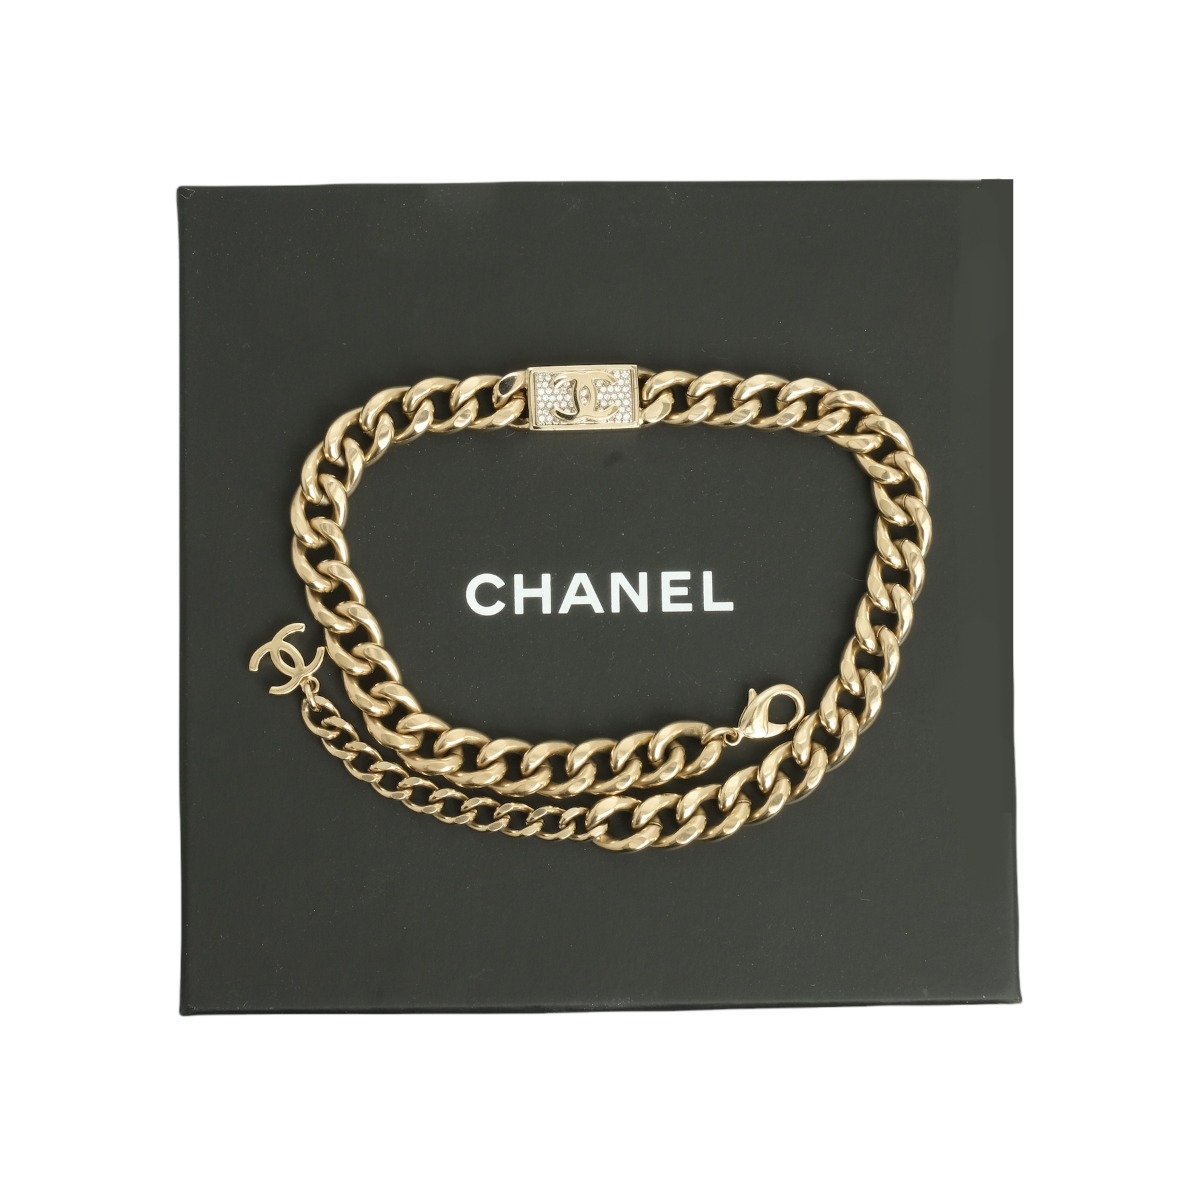 Chanel - Authenticated Necklace - Metal Gold for Women, Never Worn, with Tag